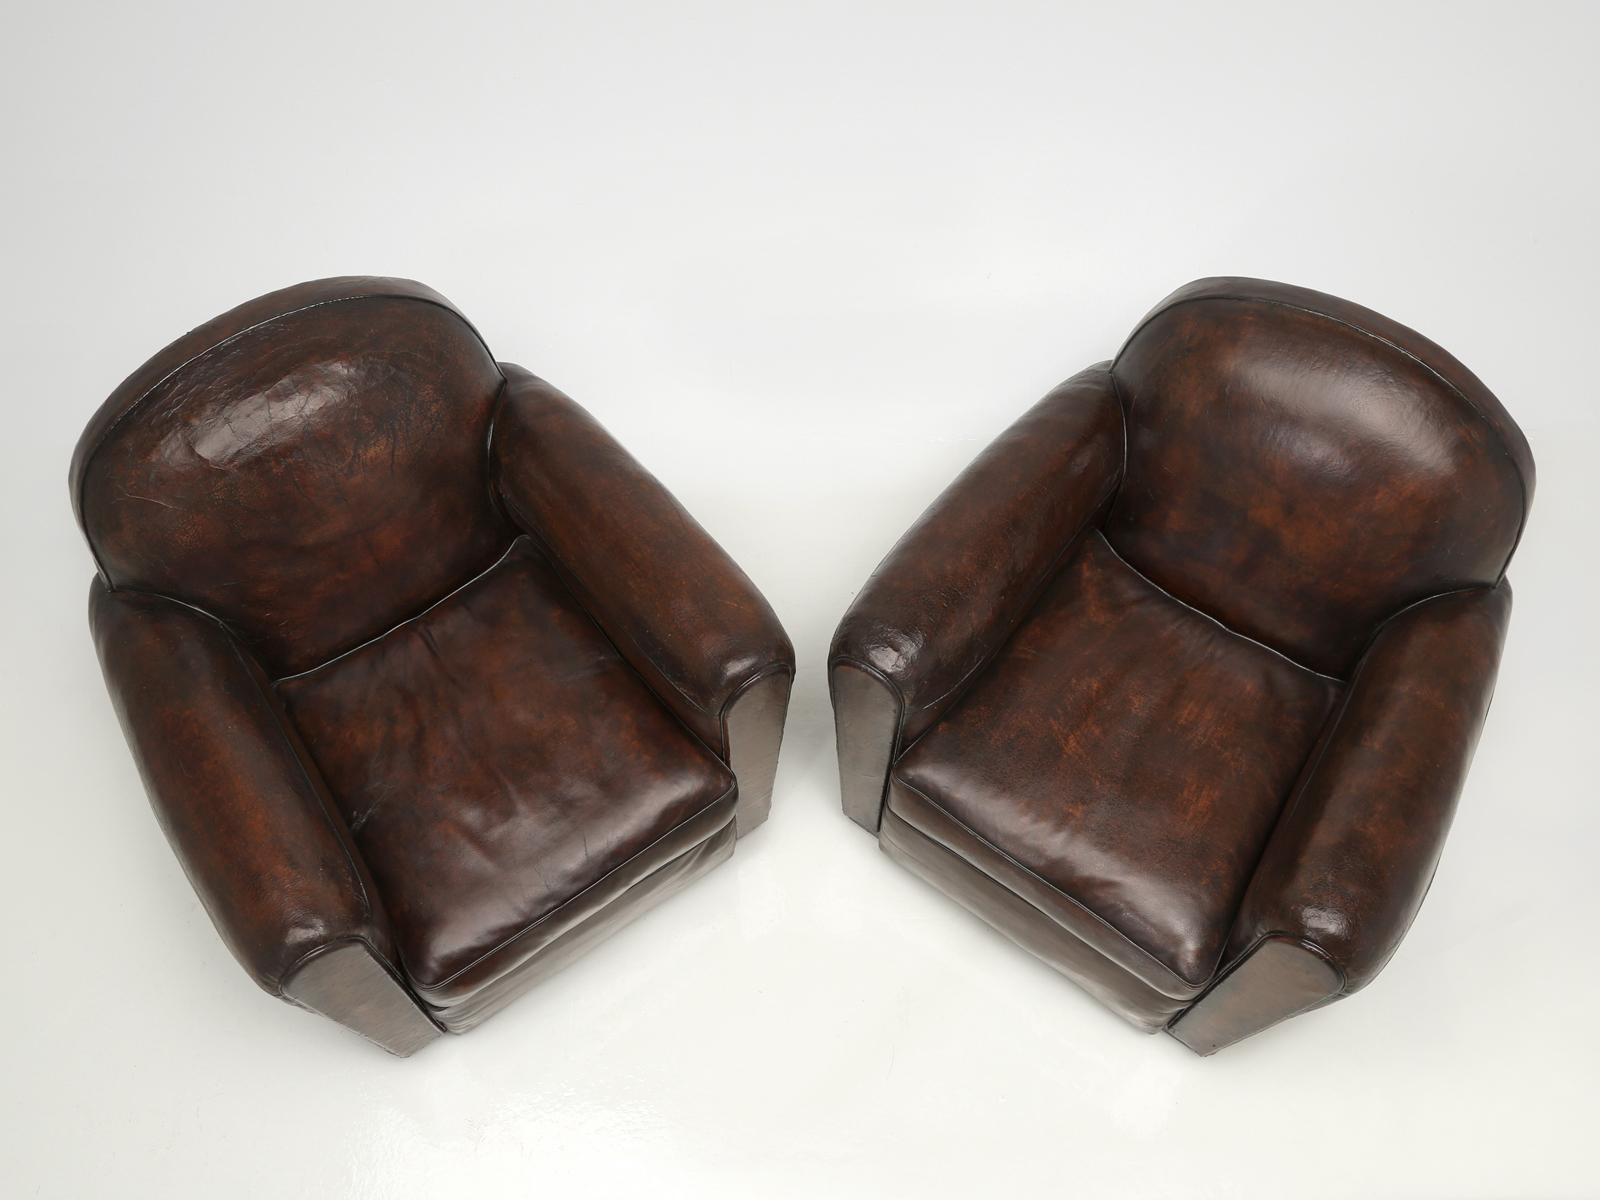 Art Deco Pair of Leather French Club Chairs Completely Restored, Original Leather